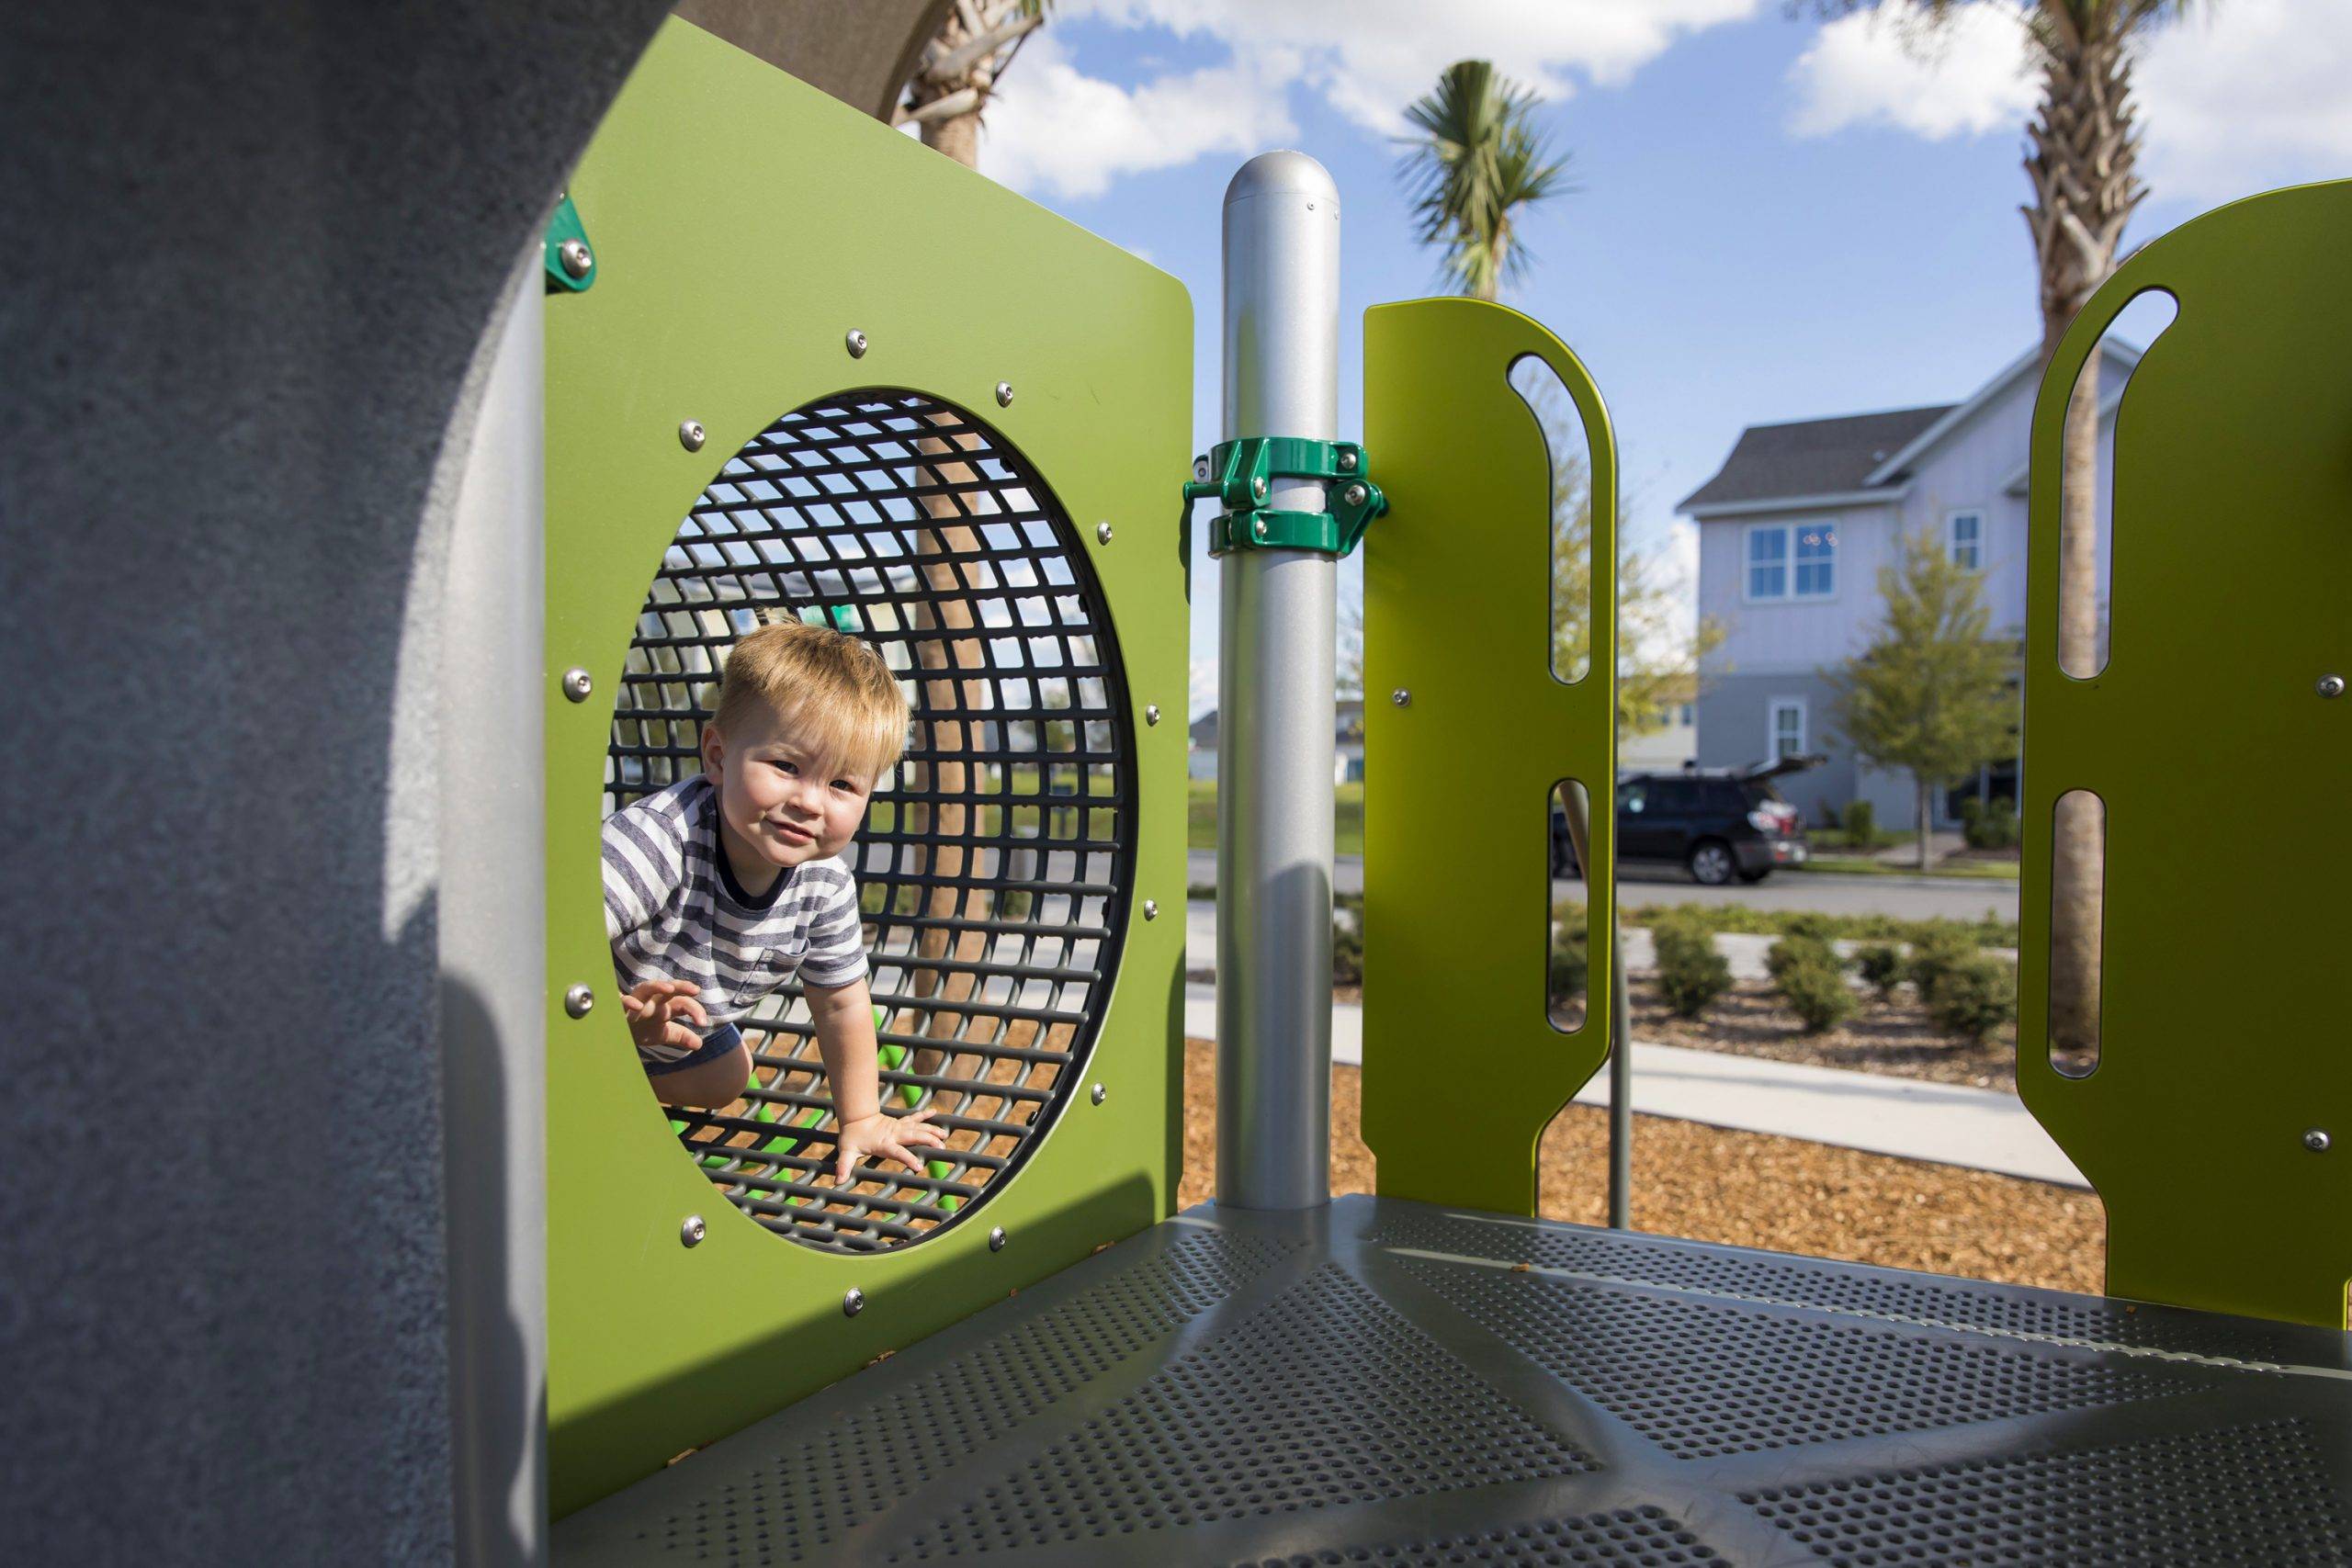 Kids at Play: A Parent's Guide to Lake Nona 9